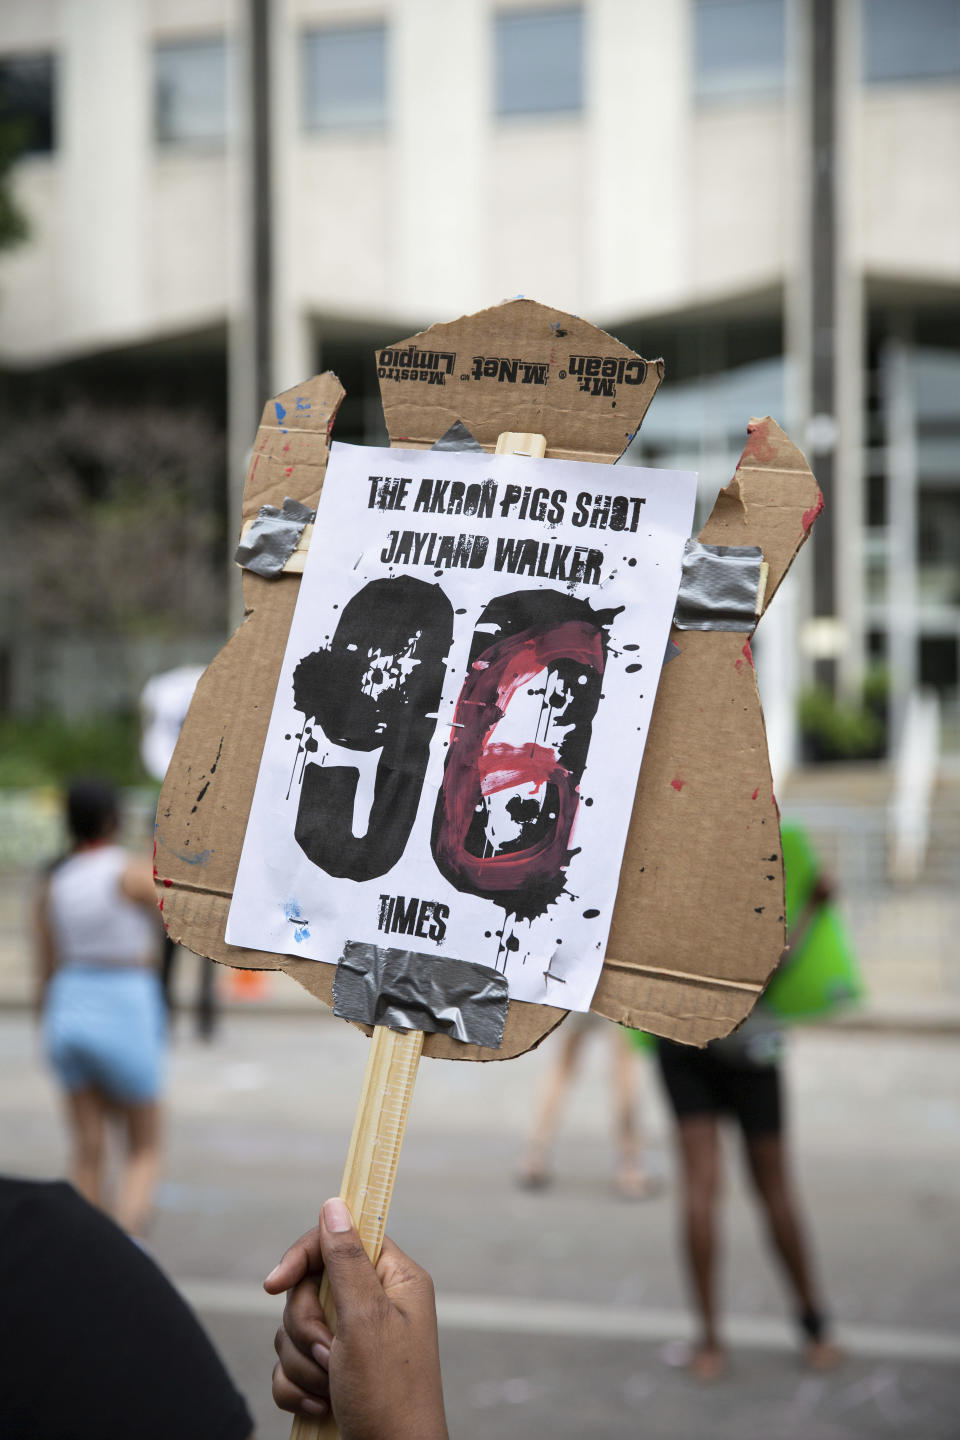 Protests continue in Akron, Ohio on July 4, 2022 after Mayor Dan Horrigan declared a state of emergency and canceled Fourth of July fireworks following protests calling for justice in the police killing of Jayland Walker (Photo by Karla Coté/SIPA USA).(Sipa via AP Images)